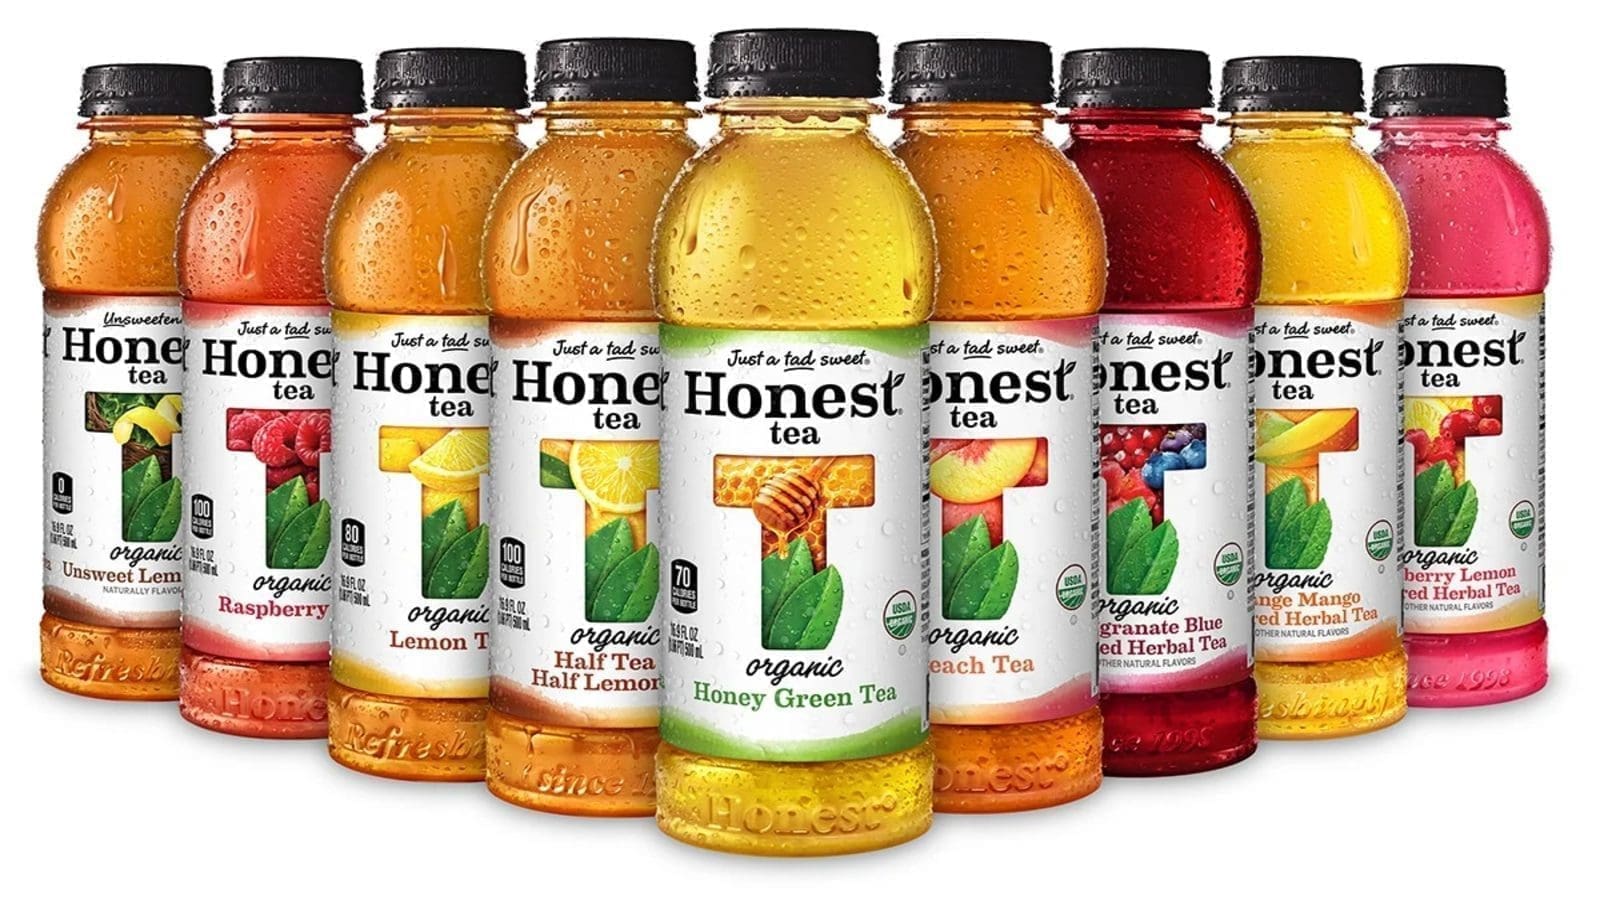 Coca-Cola discontinues Honest Tea product line as focus shifts to brands with greatest growth potential